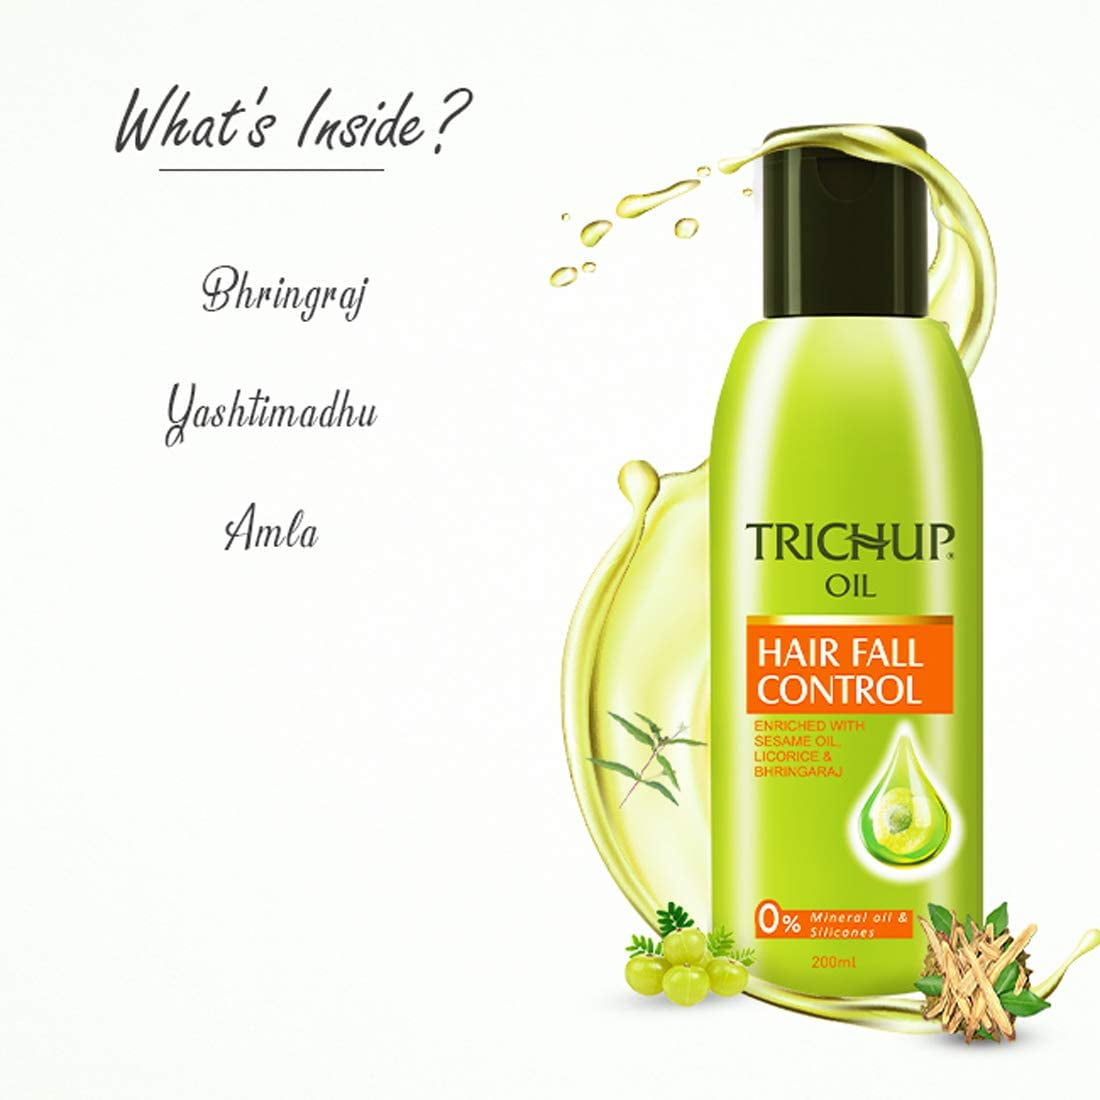 Trichup Hair Fall Control Oil, 100 ml Price, Uses, Side Effects,  Composition - Apollo Pharmacy